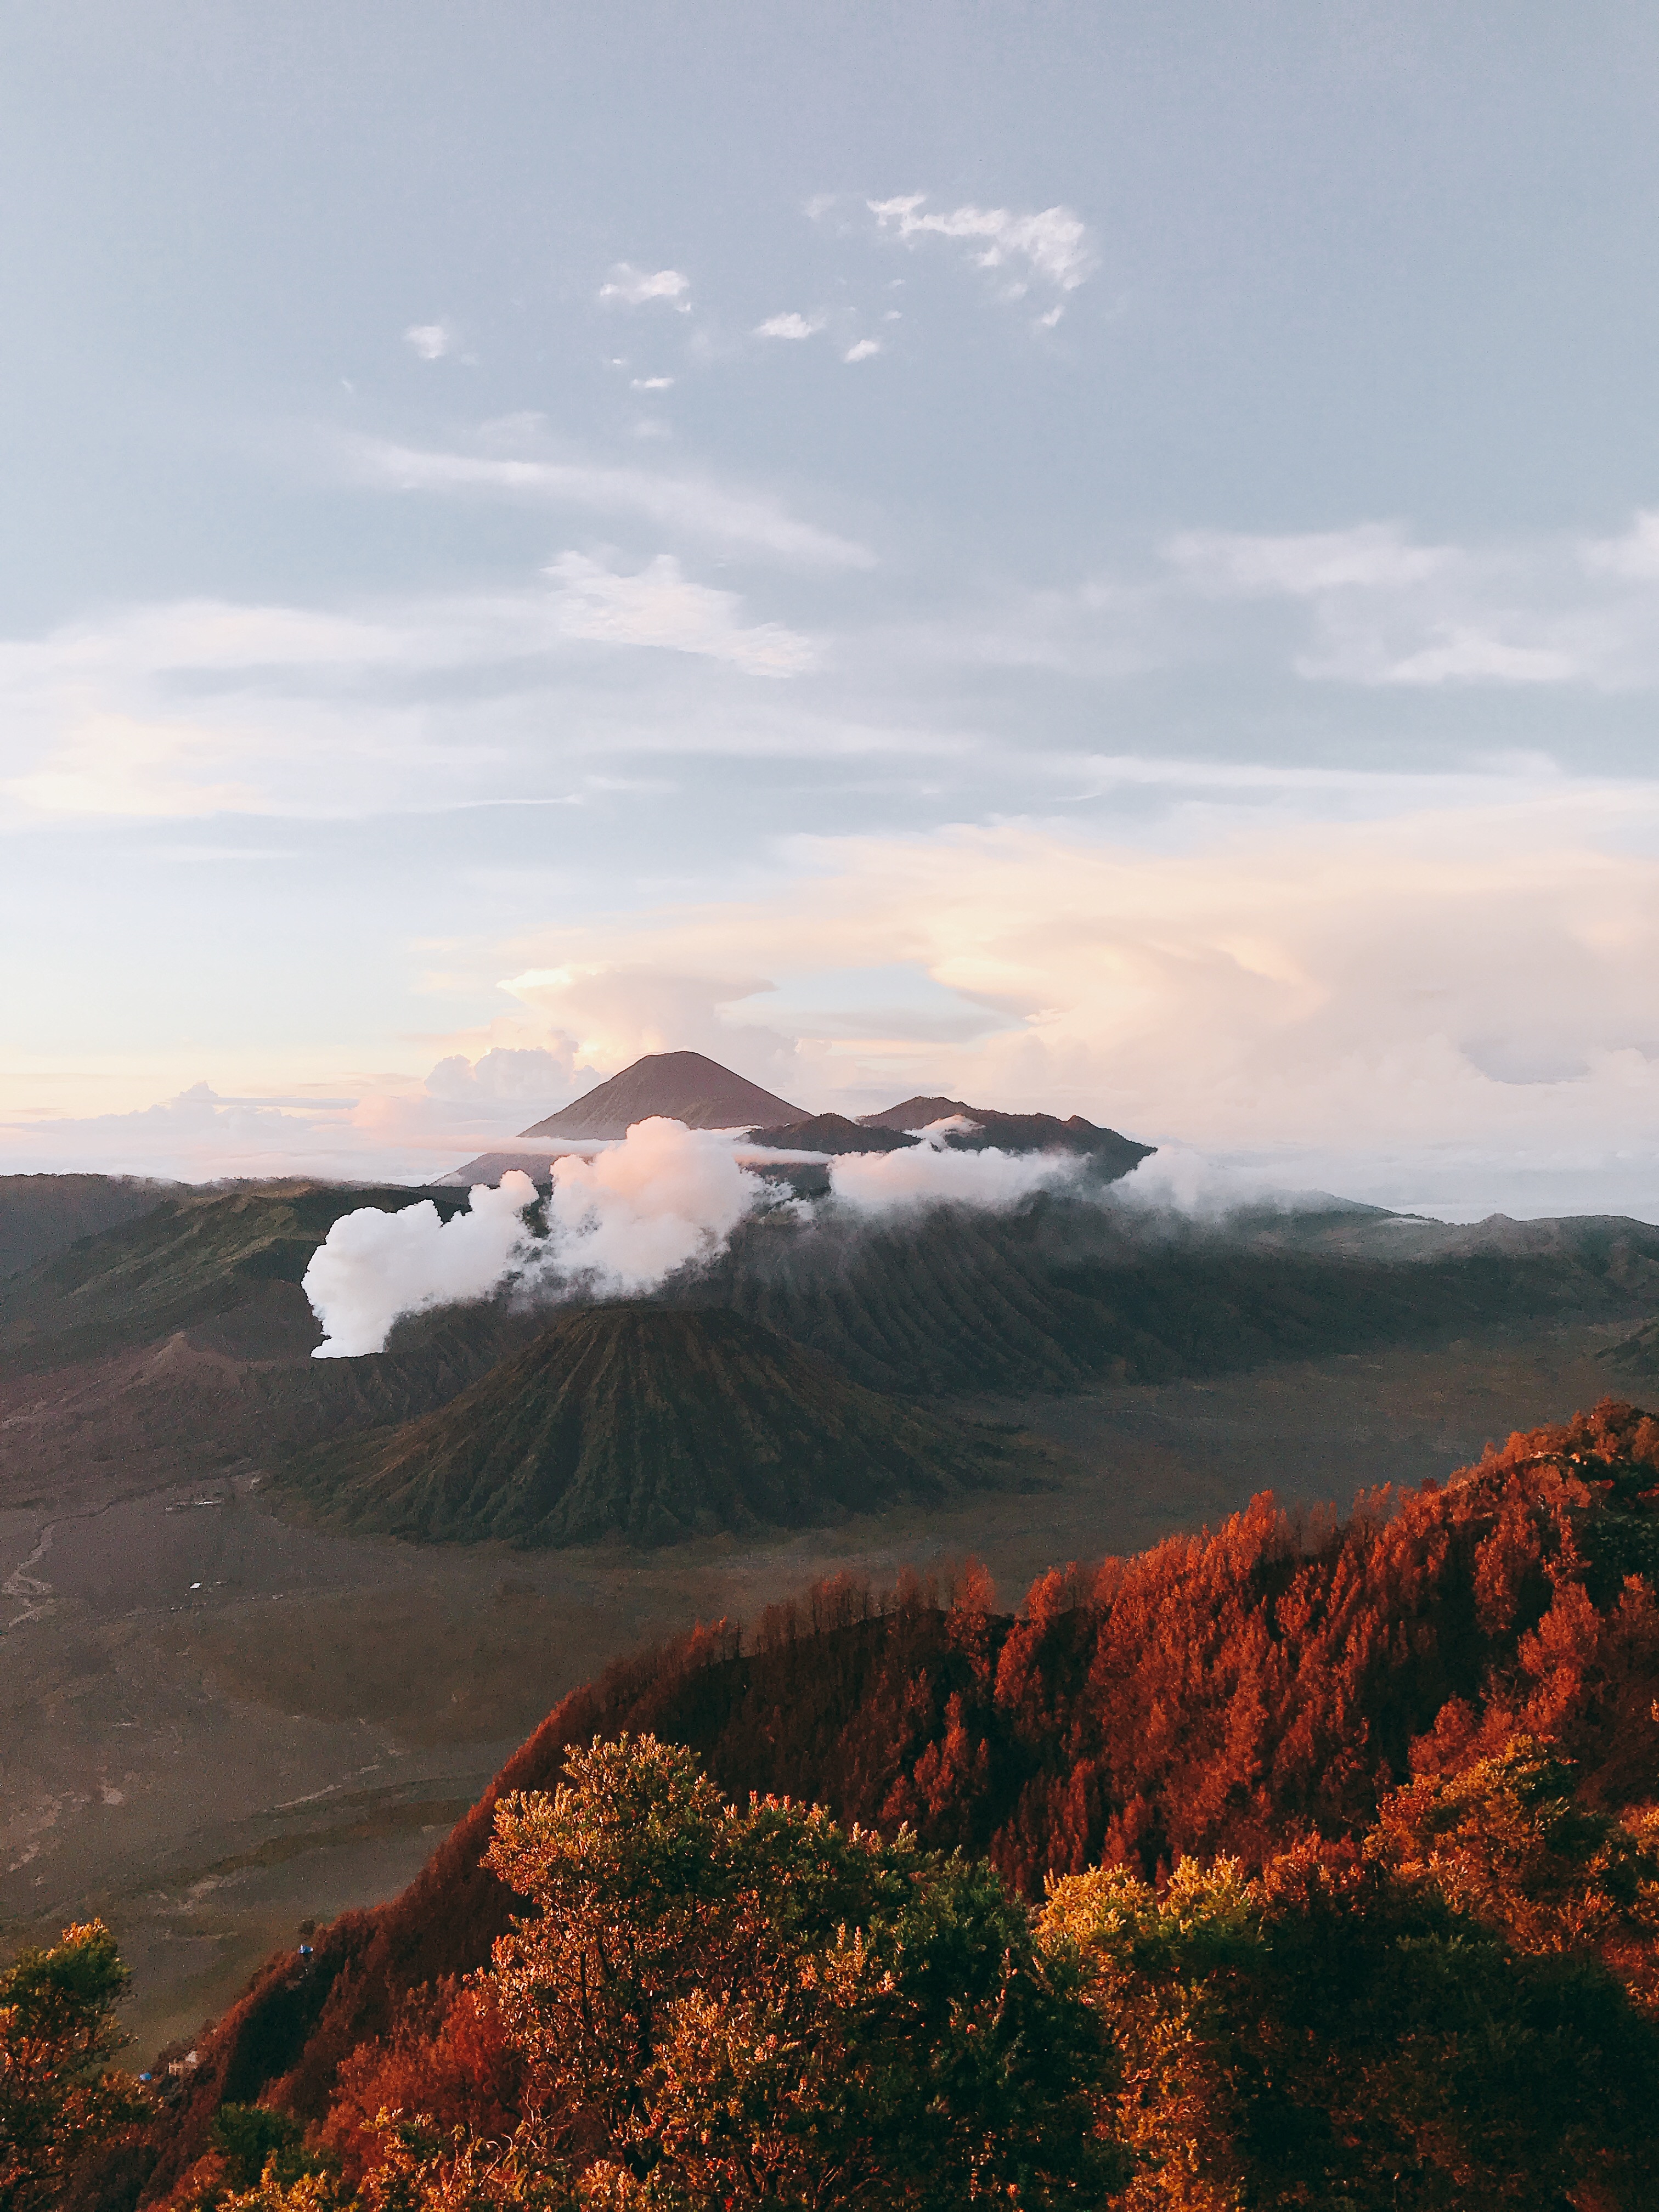 Den Indonesia, cham chan toi mieng nui lua Bromo hinh anh 54